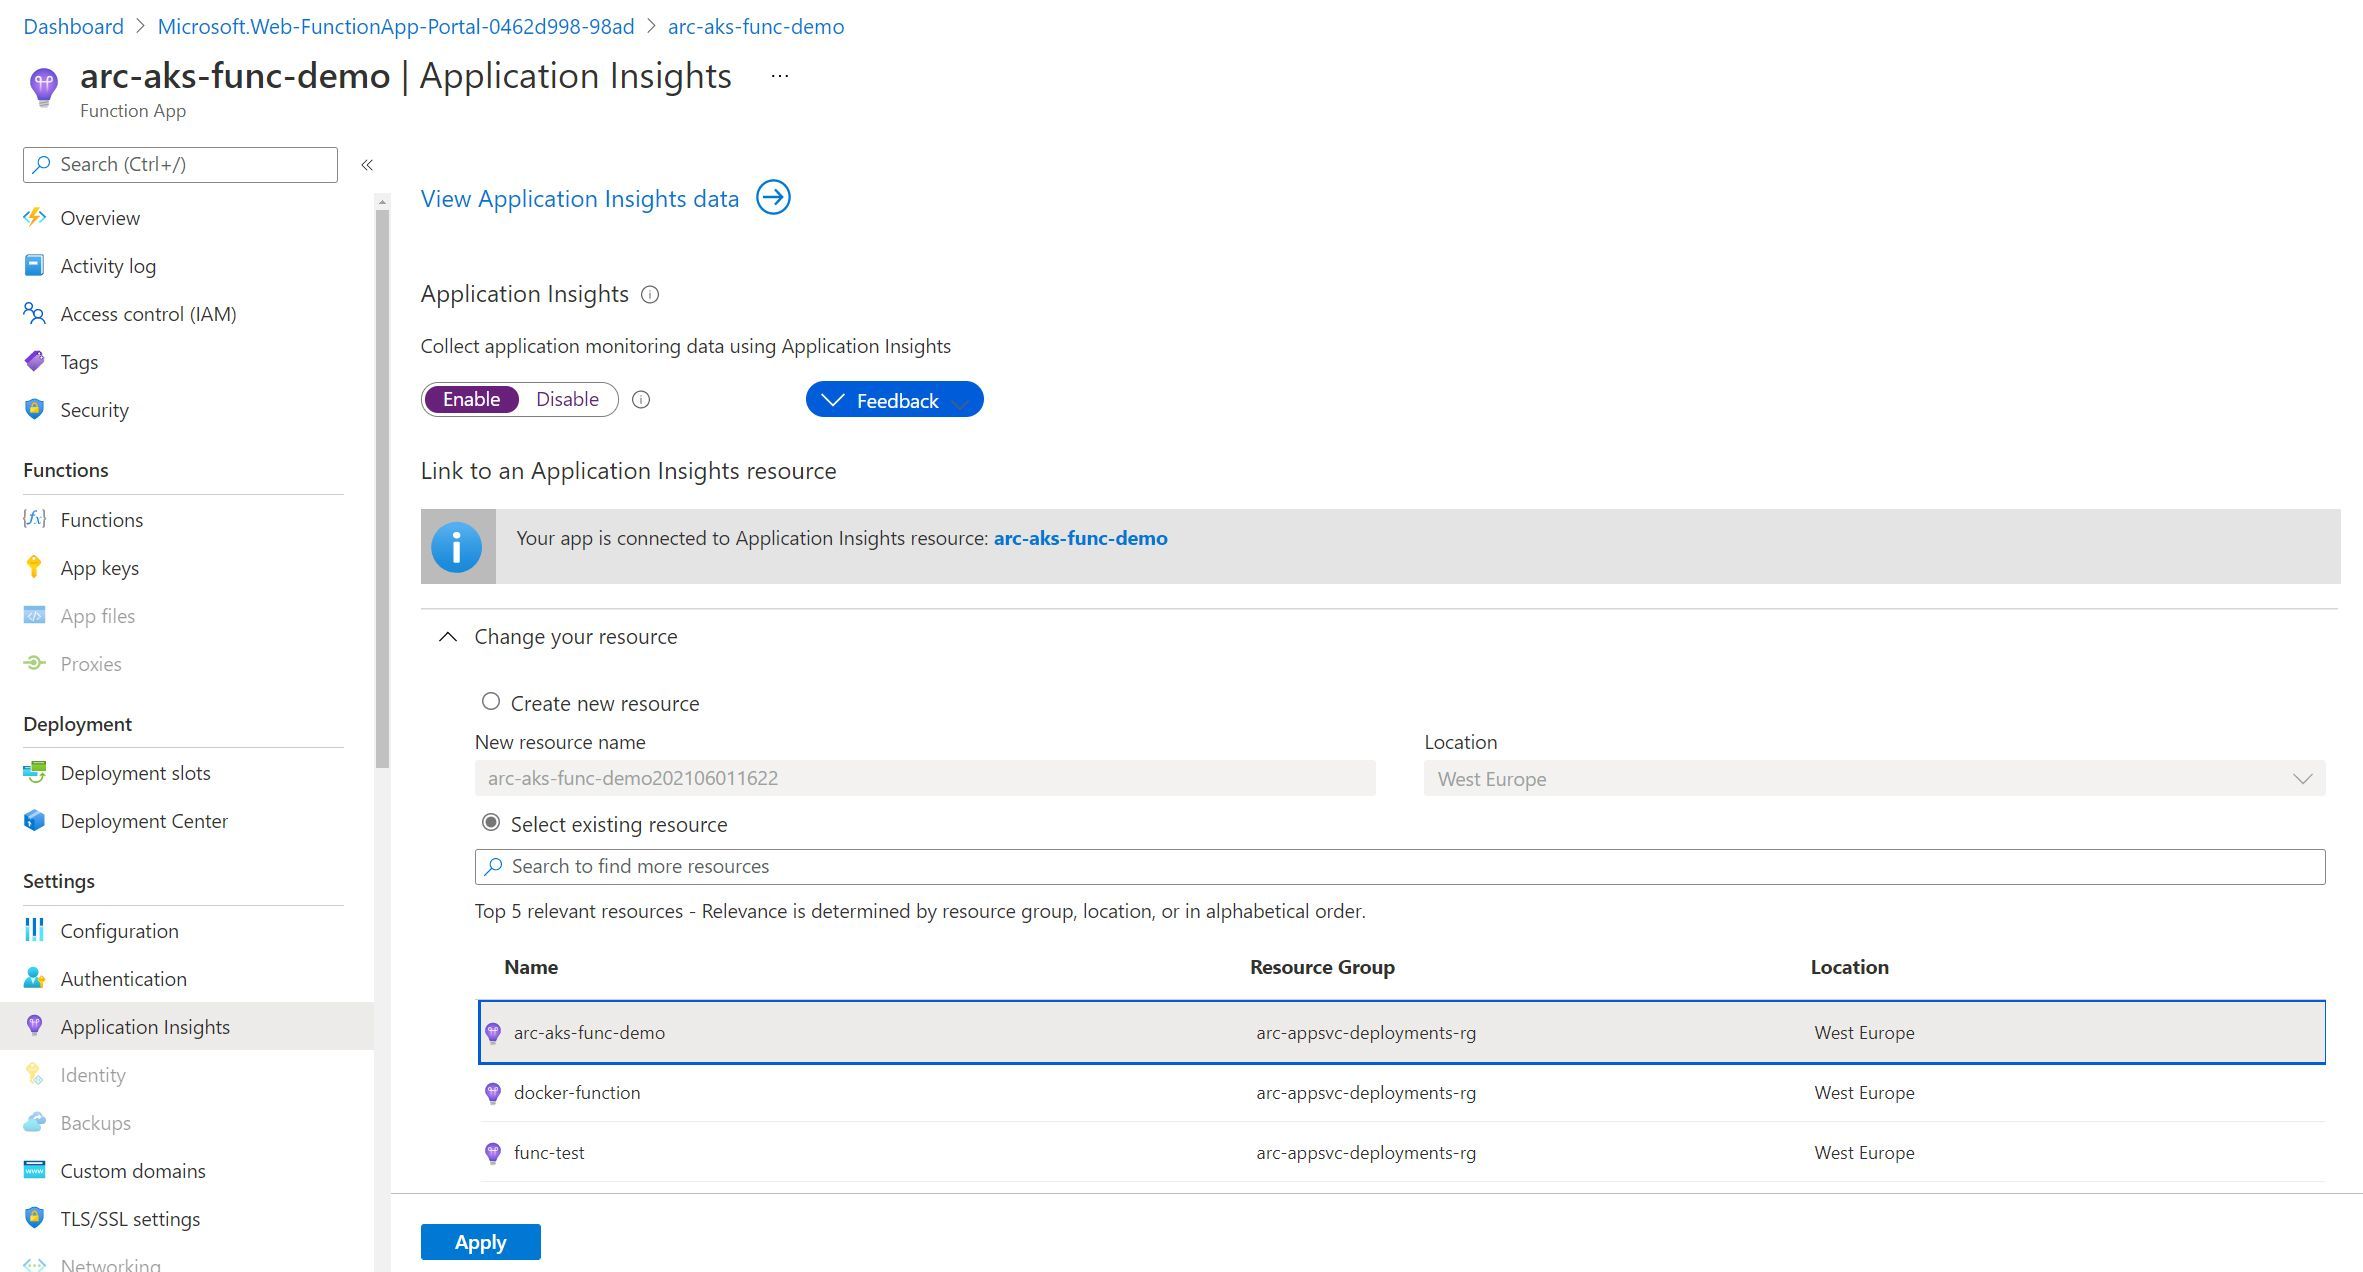 Screenshot showing the App Insights configuration experience for a Function App in an Application Service Kubernetes Environment